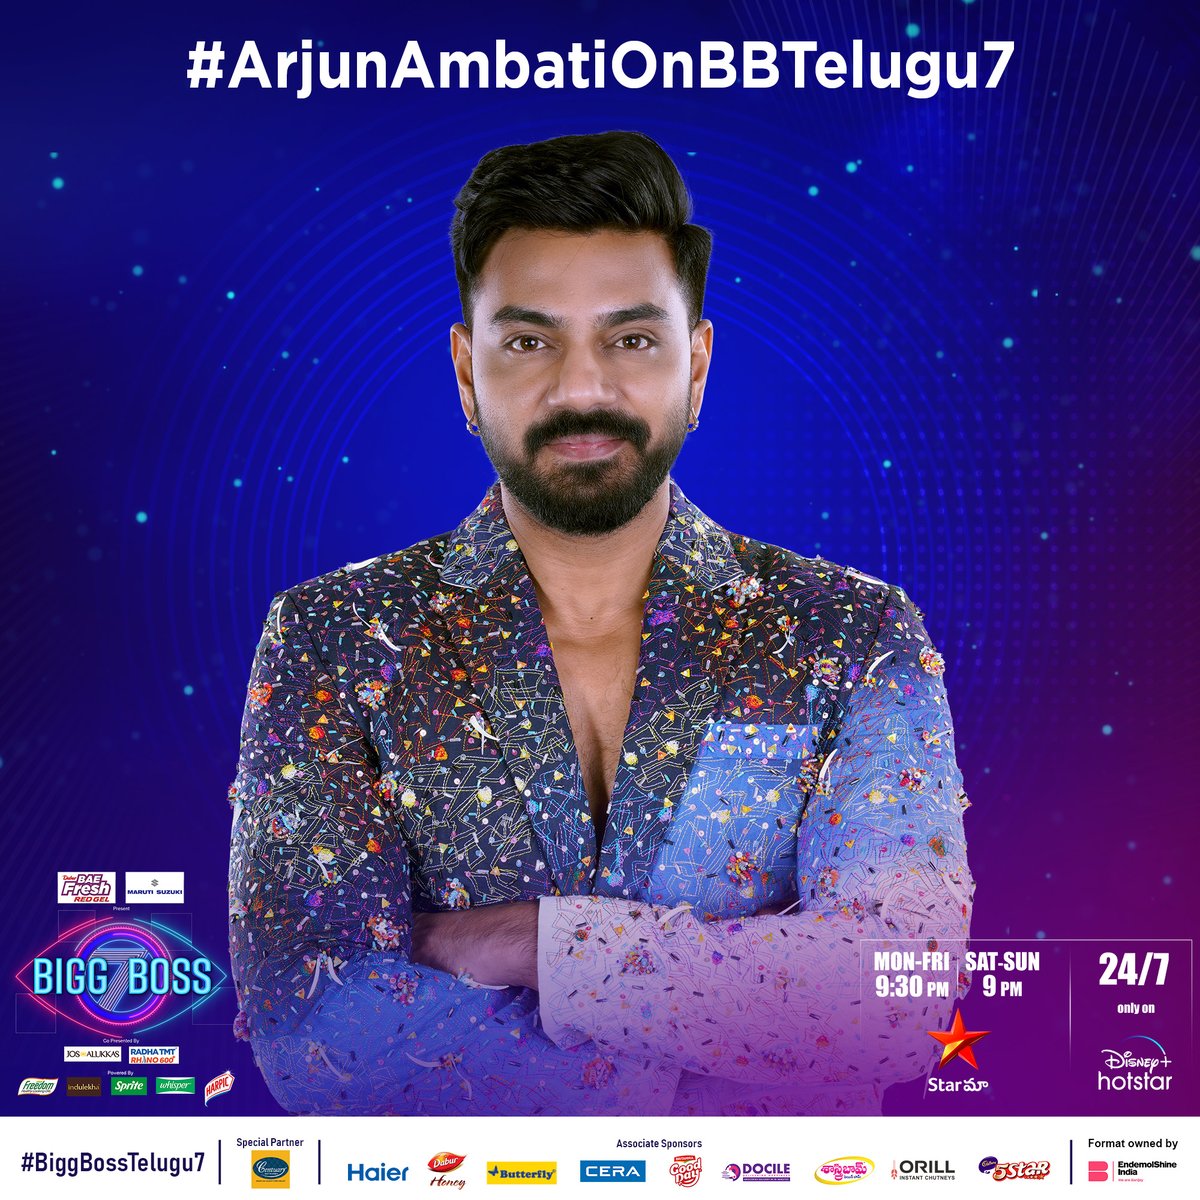 Bigg Boss Just Got a Wild Twist! 🌟🏡 Arjun Ambati storms into the Bigg Boss House as a wild card entry! Get ready for the unexpected as he shakes things up in the game. Don't miss out on the excitement! 🔥😎#ArjunAmbationBBTelugu7 #BiggBossTelugu7 @DisneyPlusHSTel @iamnagarjuna